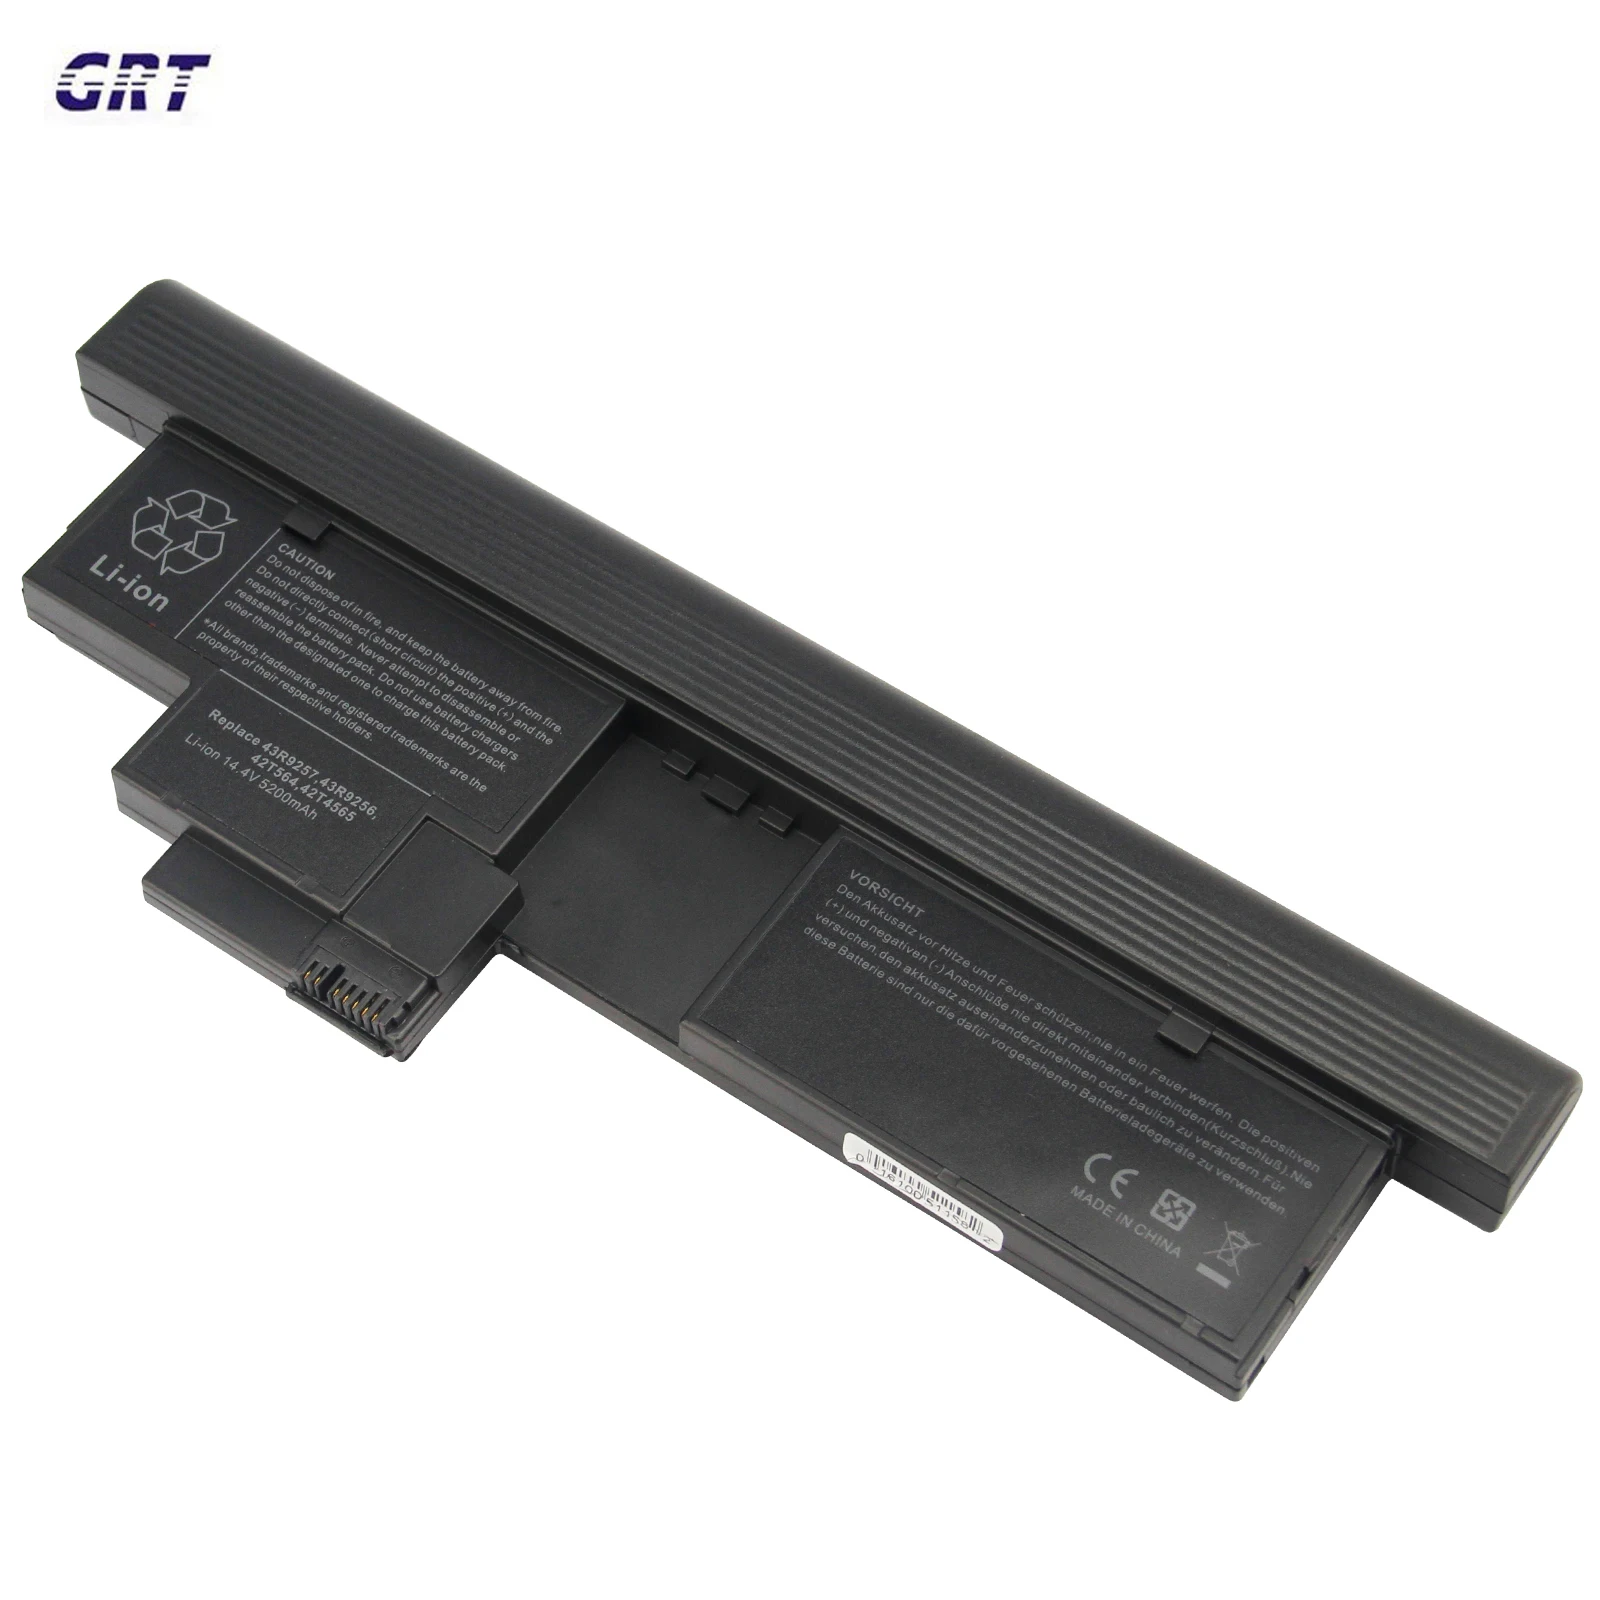 Yrdd6  42wh New Genuine Brand Laptop Battery For Dell Inspiron Yrdd6  5480 5482 5485 5584 5488 5493 5590 Battery - Buy New Battery For Dell Yrdd6,Rechargeable  Battery For Dell Yrdd6,Laptop Battery